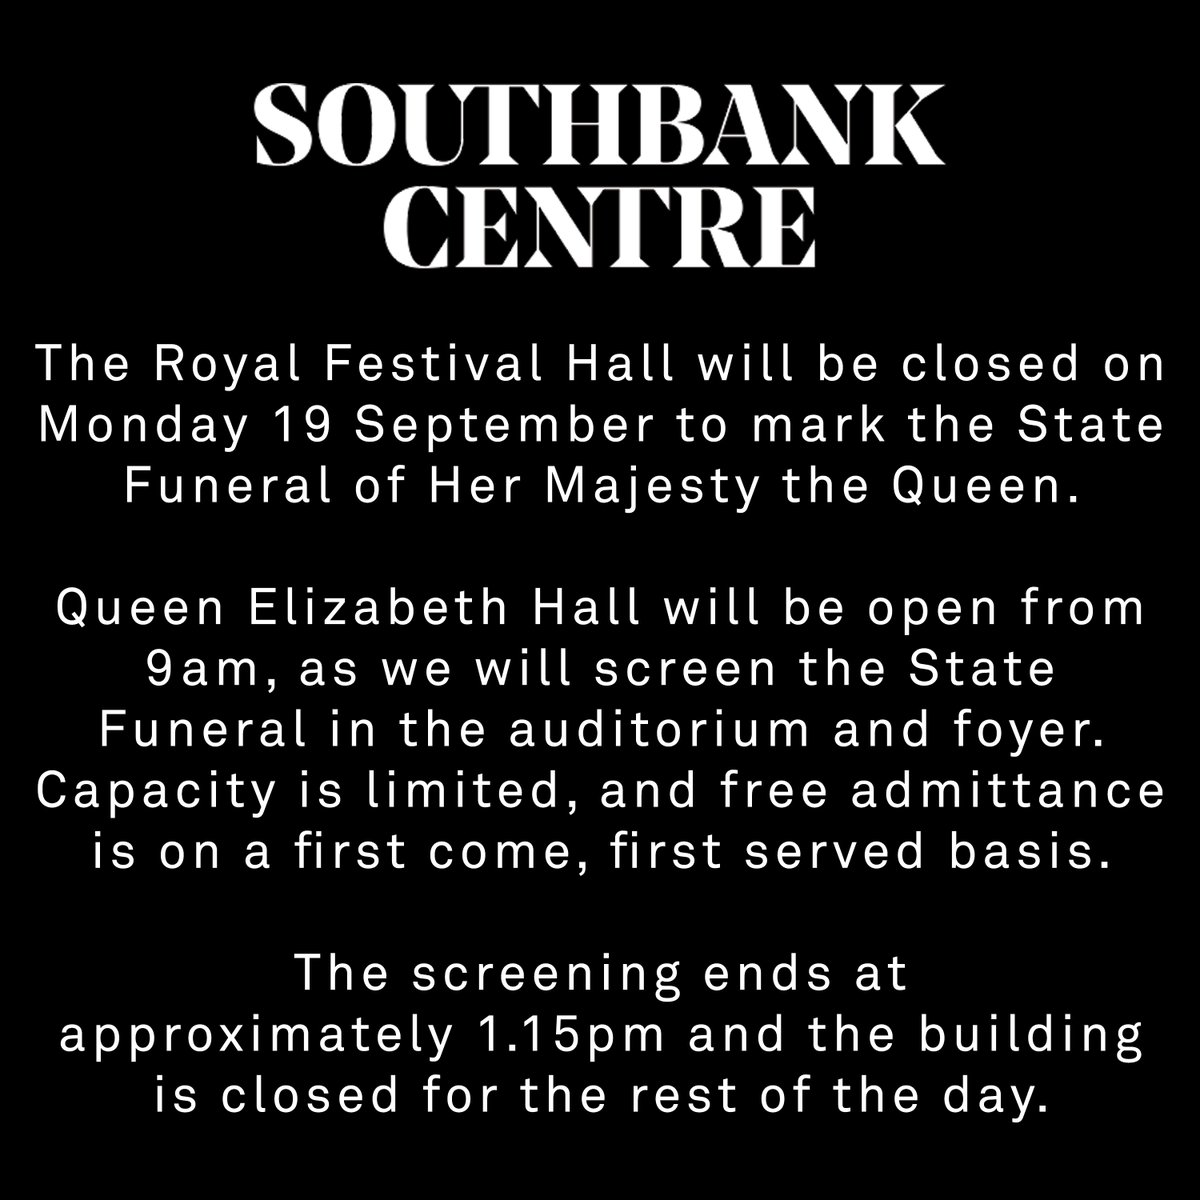 Updates on visiting the Southbank Centre on 19 September, the State Funeral of Her Majesty The Queen. For more information visit: bit.ly/3qBV5bl